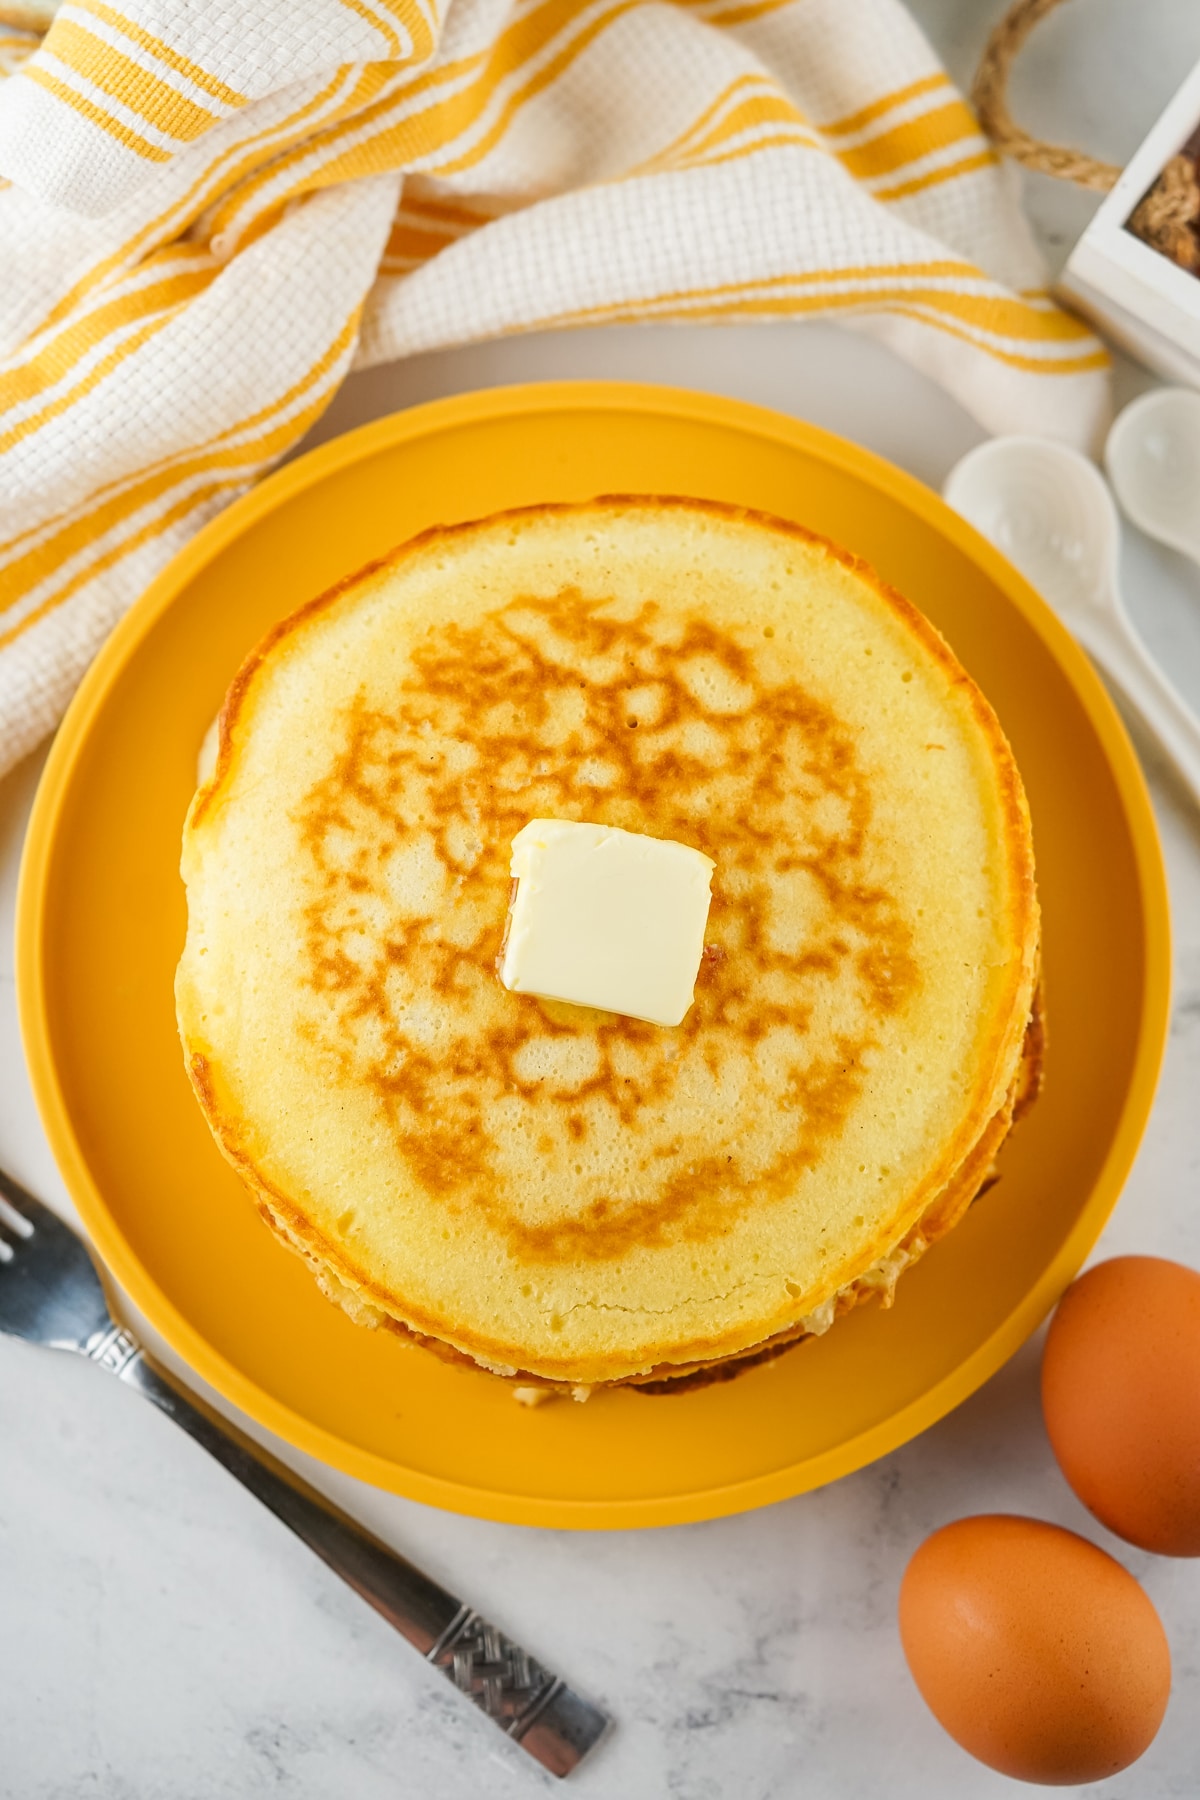 Cooked pancakes using Homemade Pancake Mix on a yellow plate with butter and eggs.